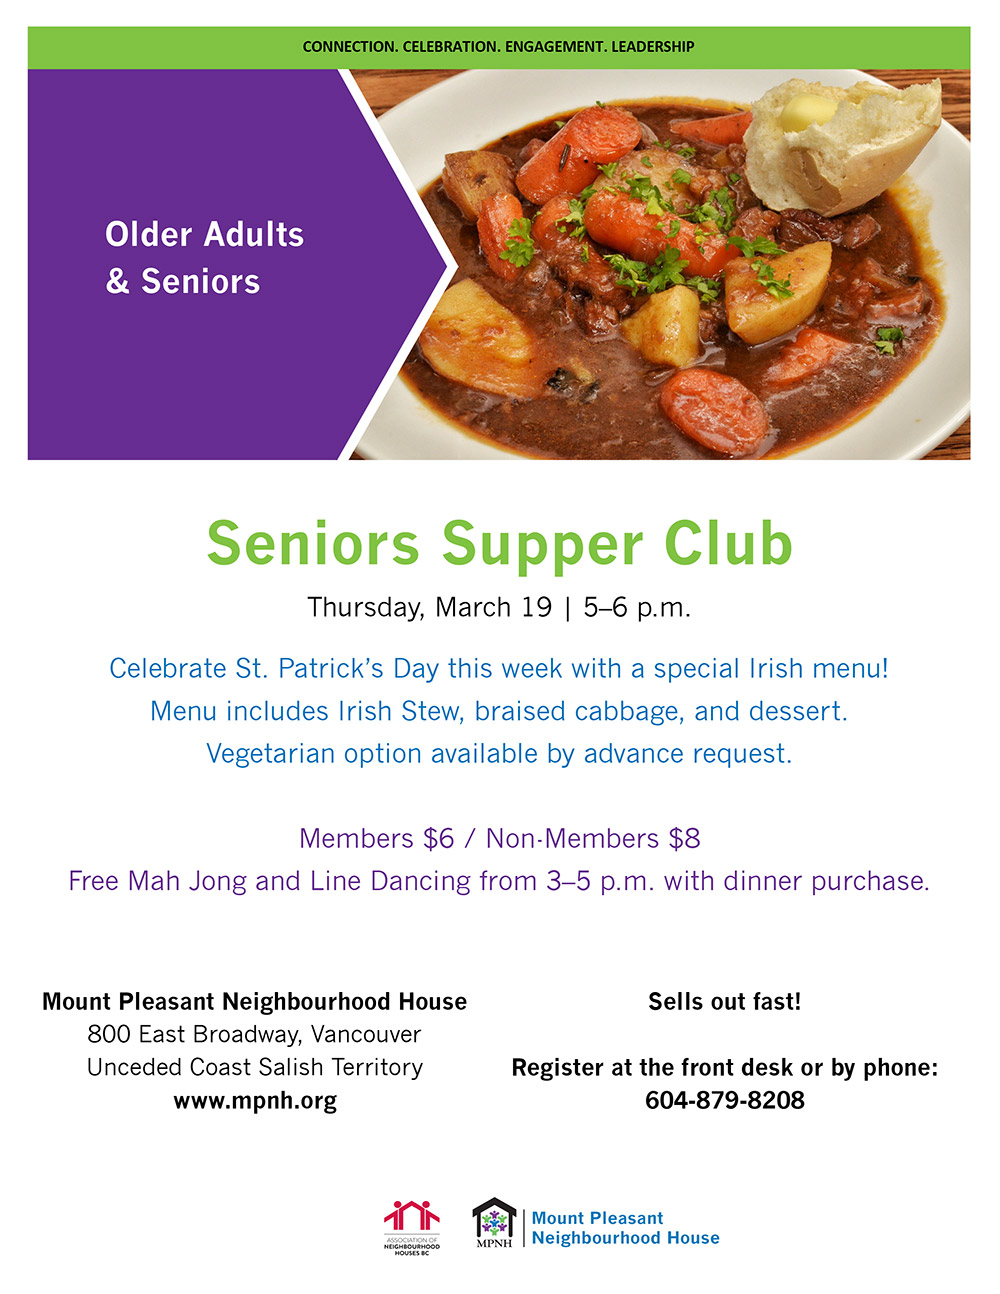 Poster for special St. Patrick's Day Seniors Supper Club showing Irish Stew